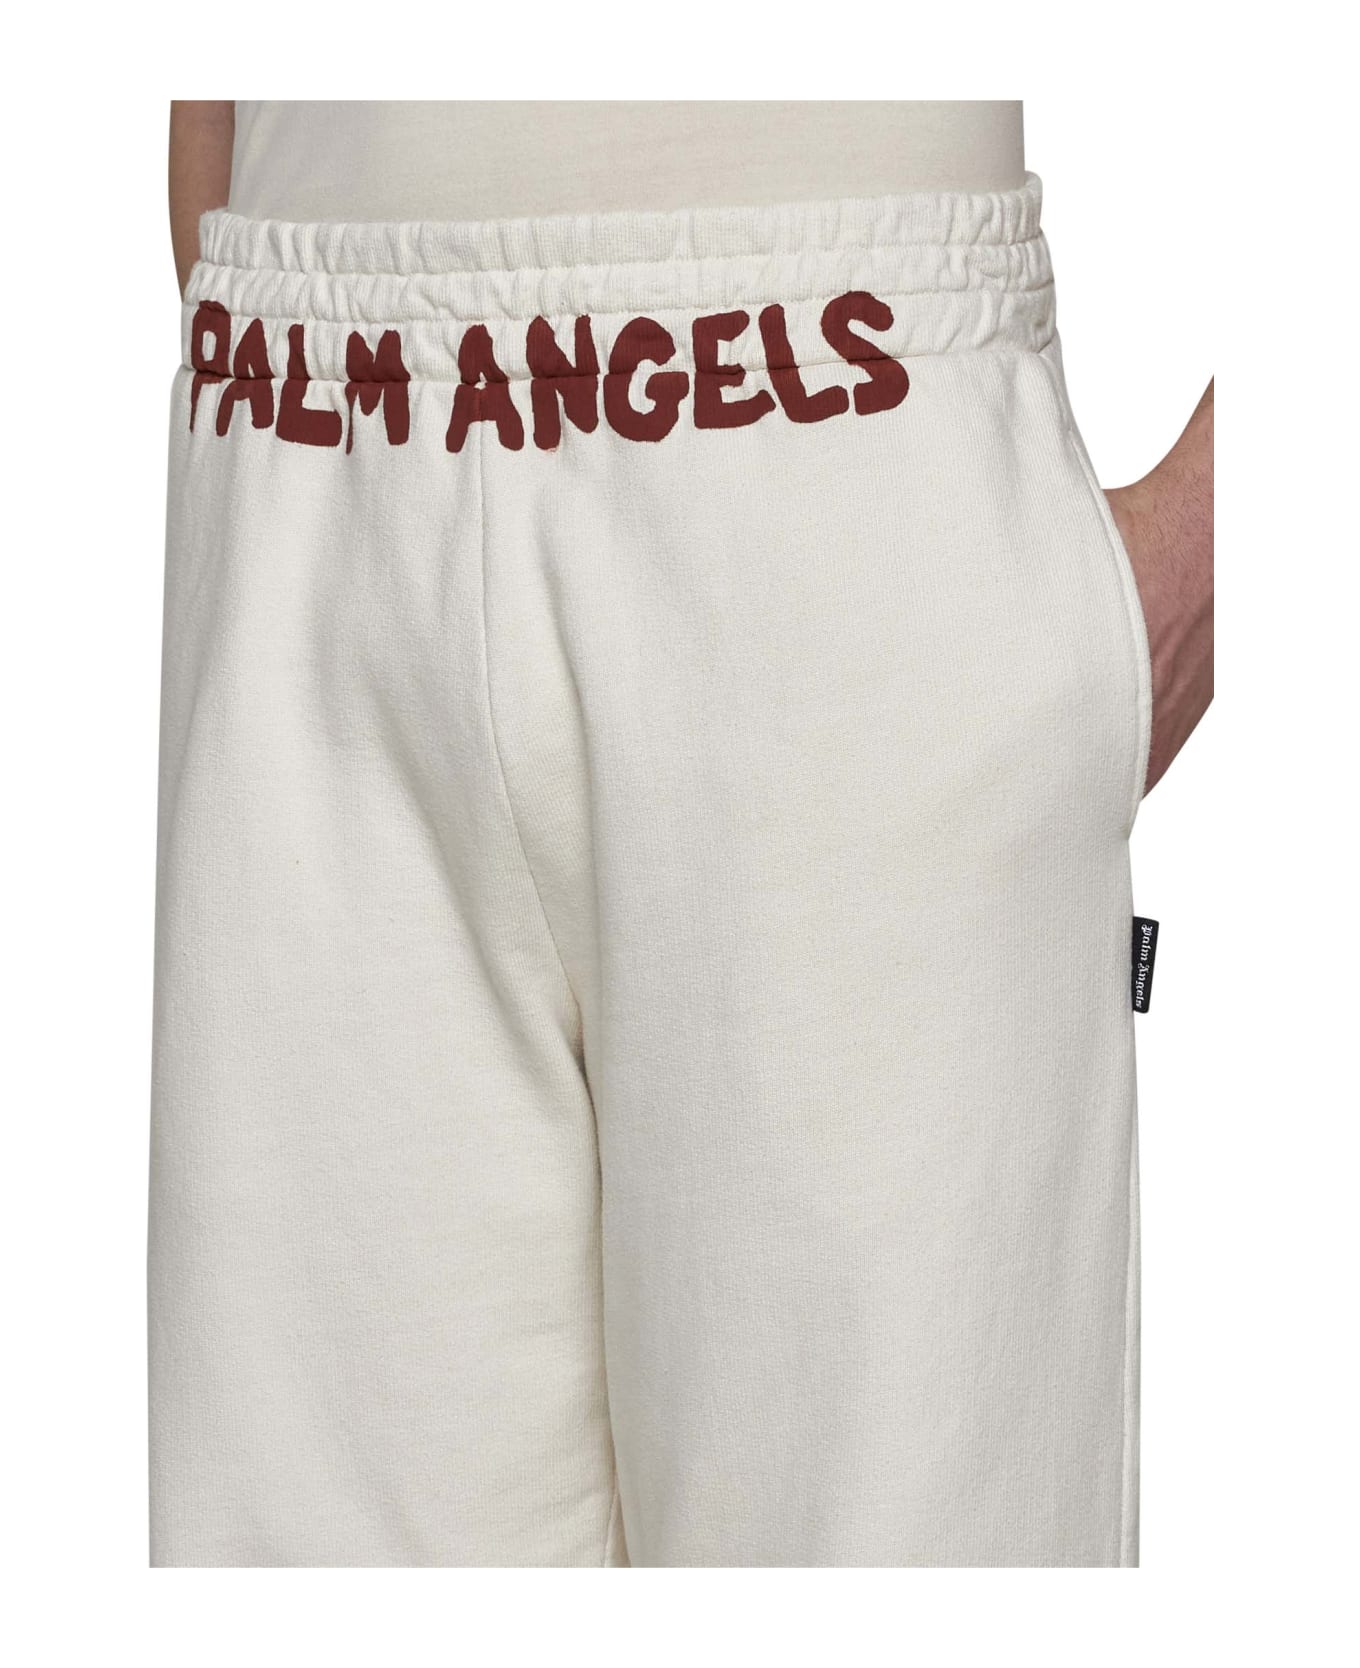 Palm Angels Pants - Off white red